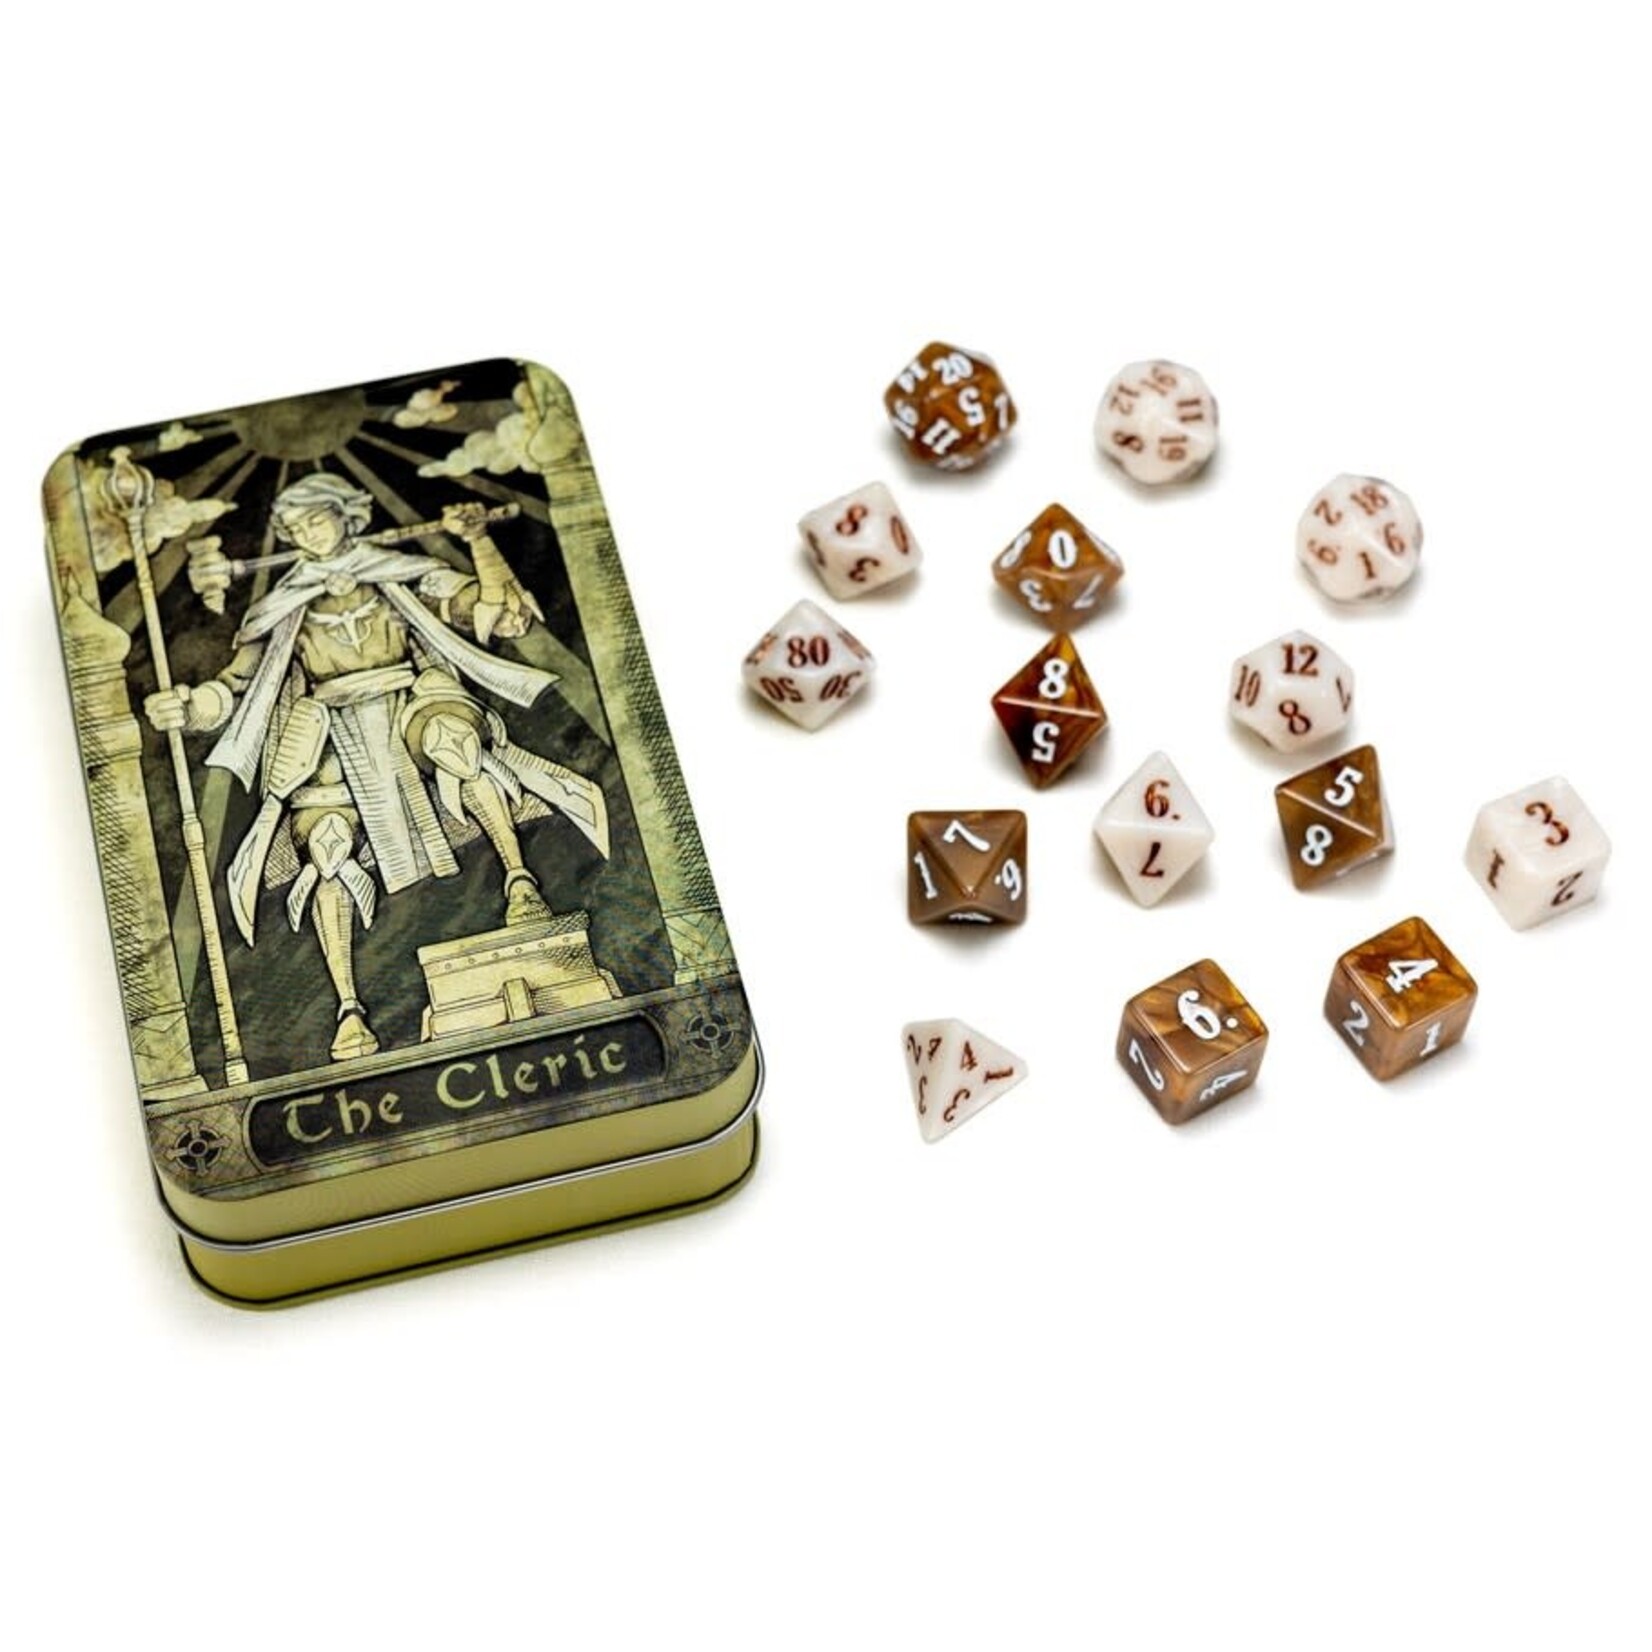 Beadle & Grimm RPG Class Dice Set: The Cleric